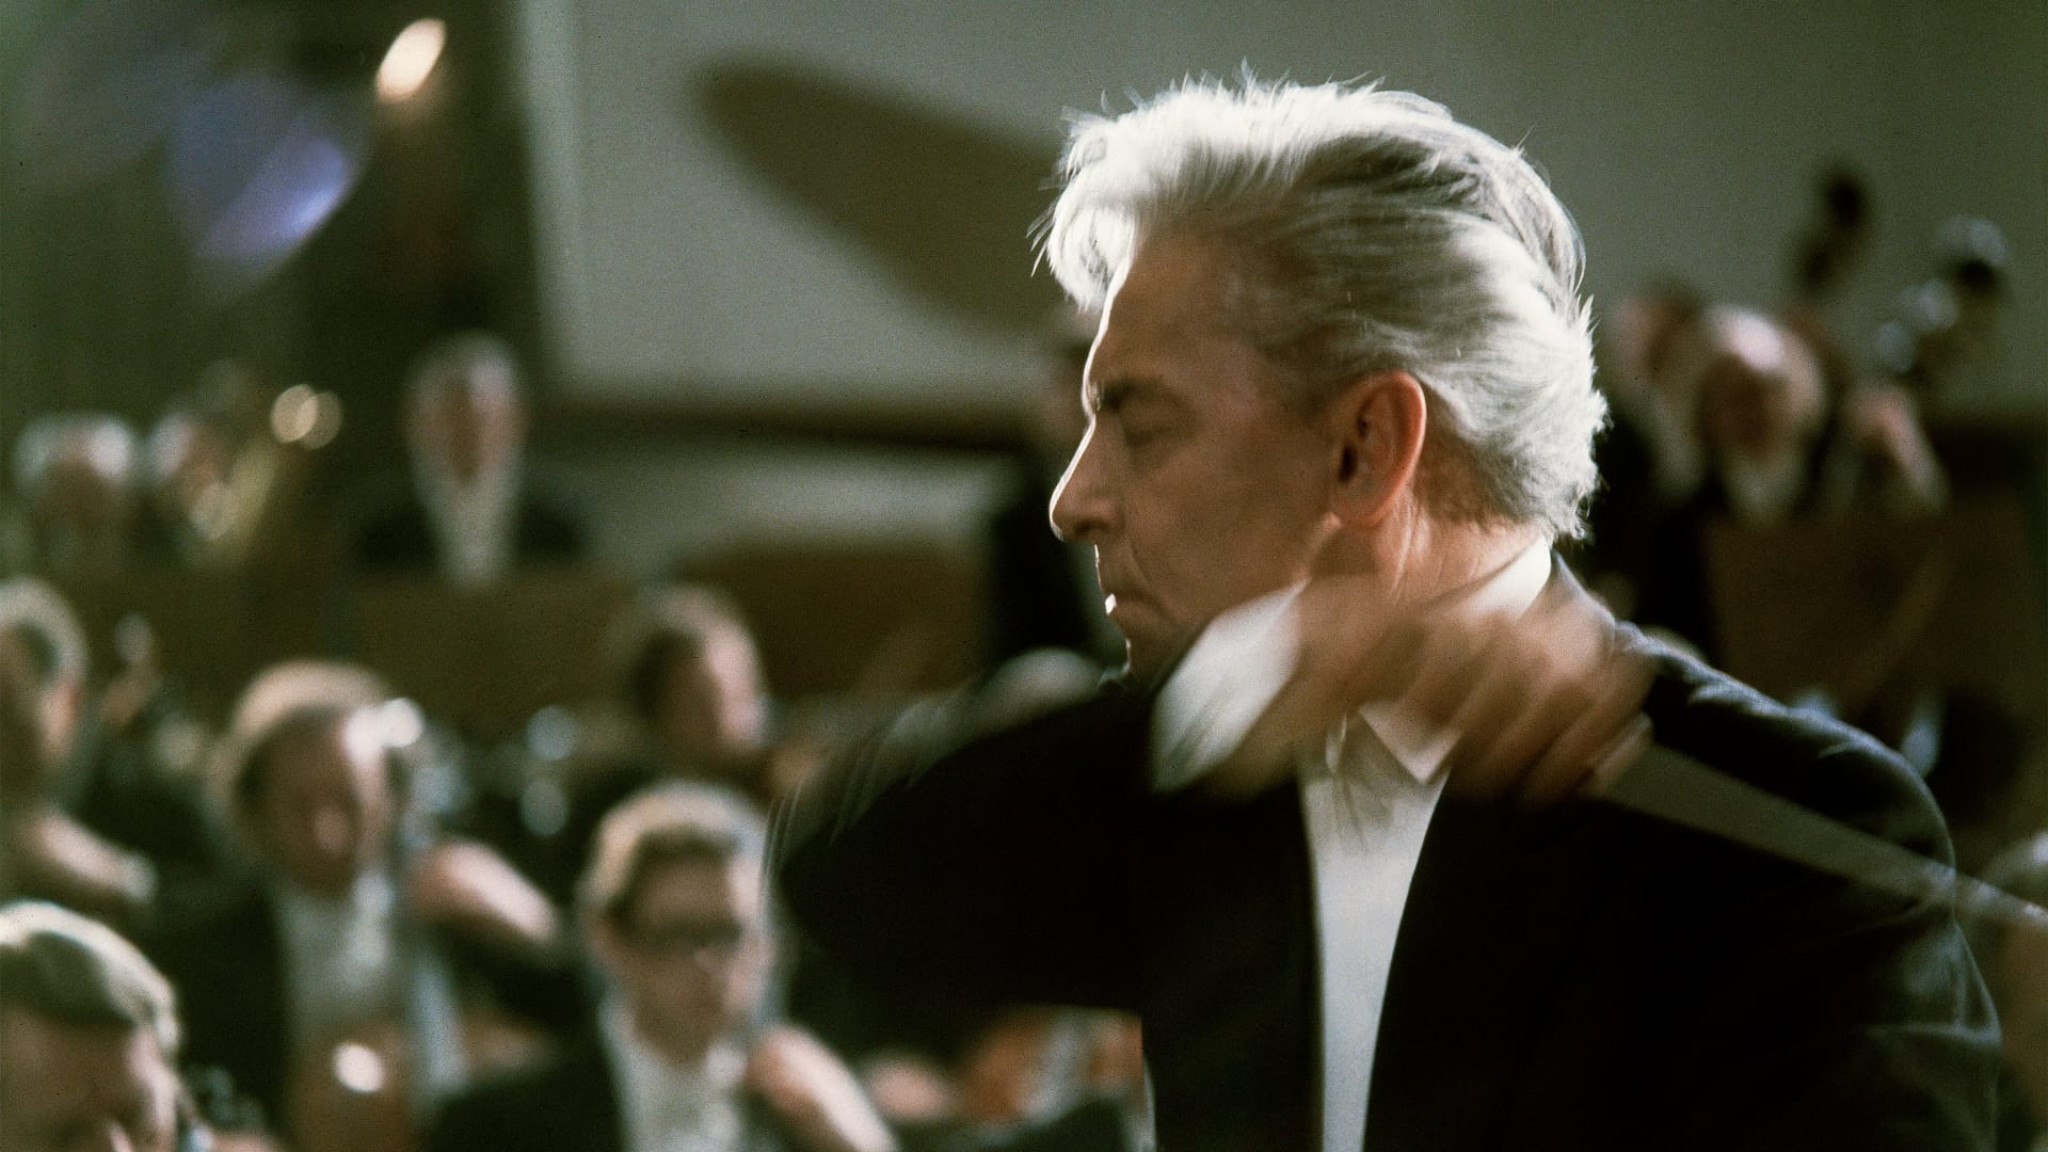 Karajan conducts Overtures by Beethoven, Rossini, Wagner & Weber